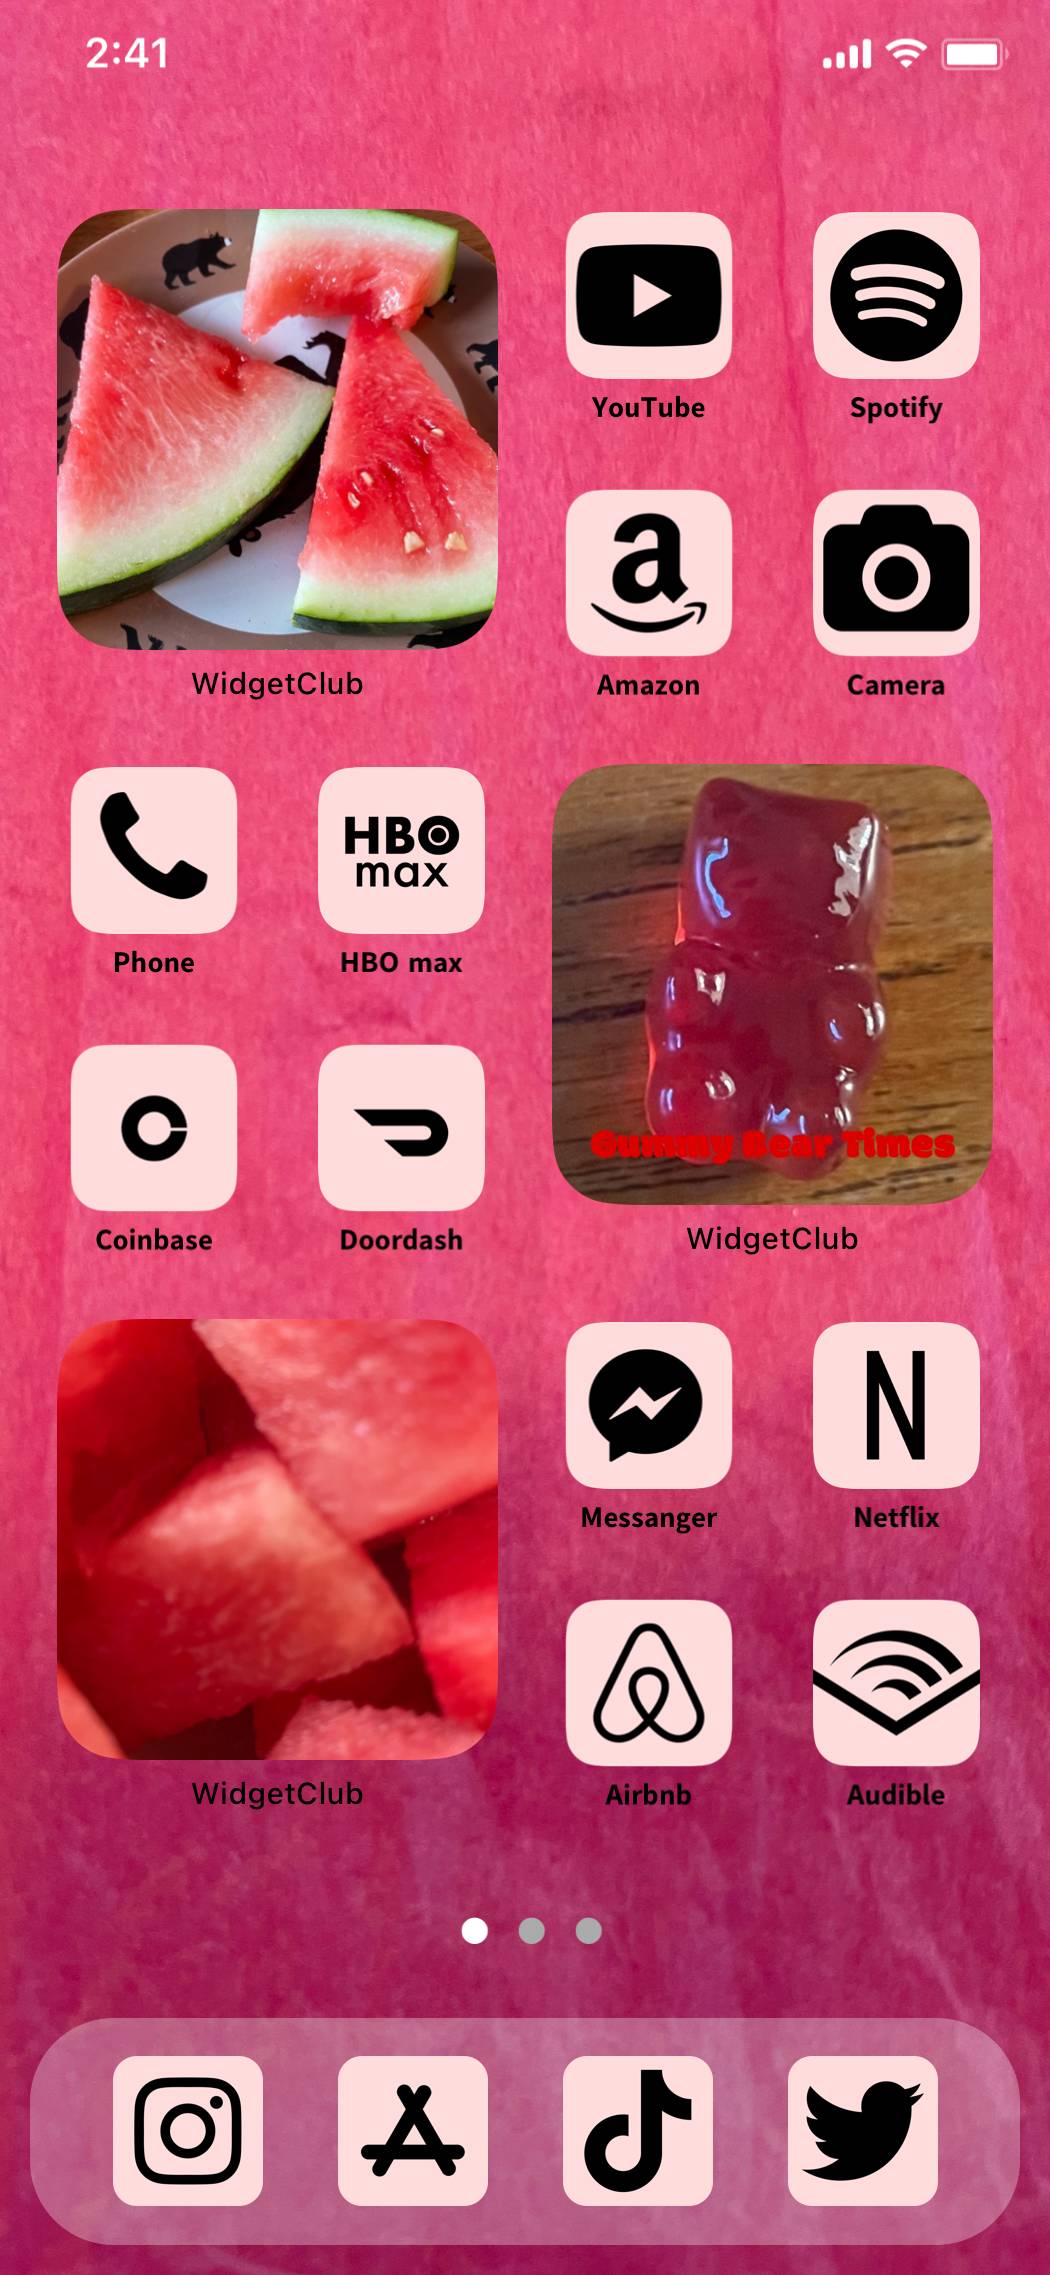 Pink and Red Foodie Theme ❤️♥️💋😘🌹 ホーム画面カスタマイズ[I3485Ofq7iOilyXZNHfI]